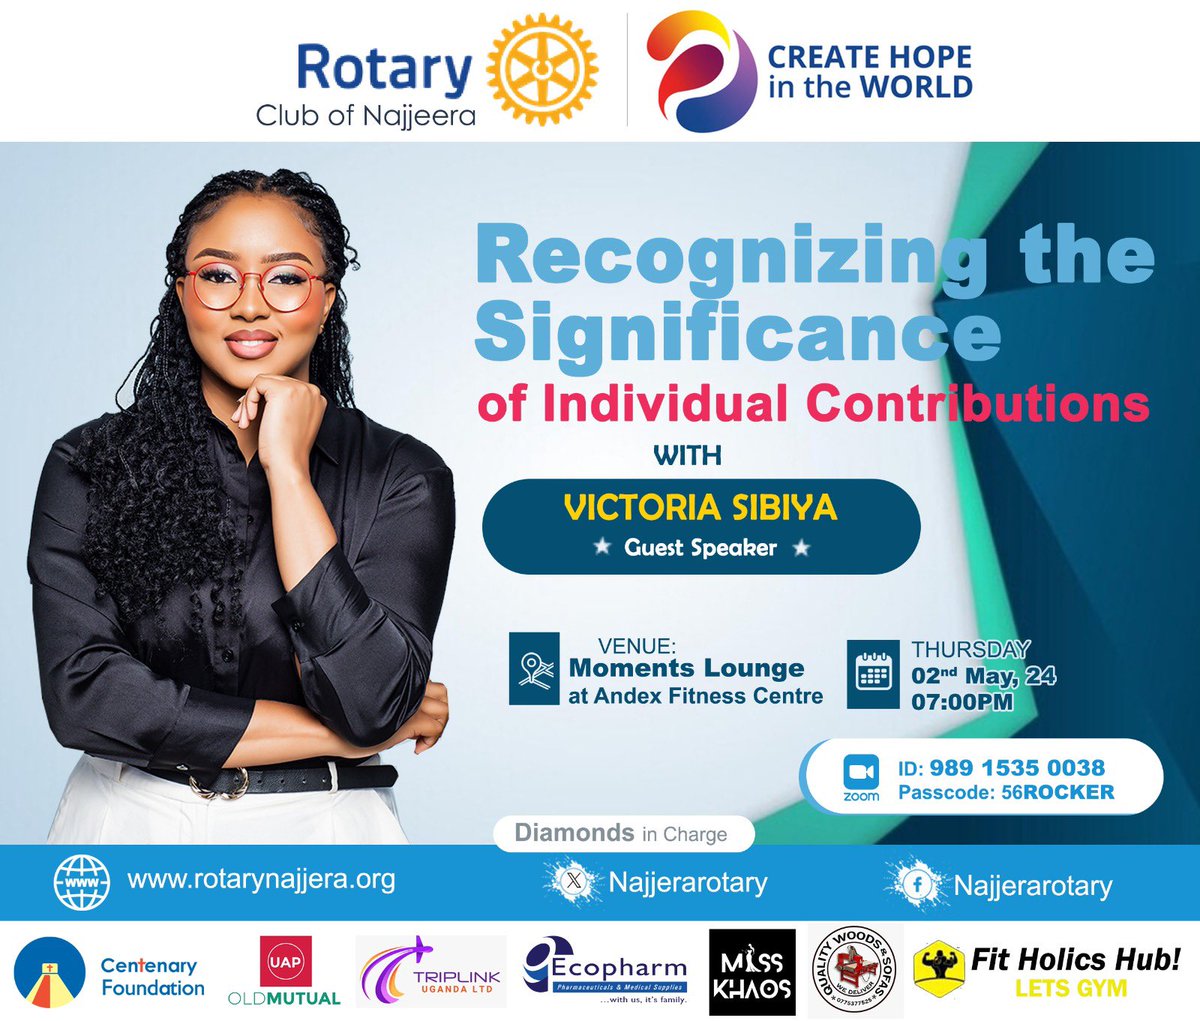 Empowerment starts with recognition. By acknowledging the efforts of individuals, we inspire them to continue making a positive impact and motivate others to do the same. #ThisWeek #Rotary @Rotary #DoGood